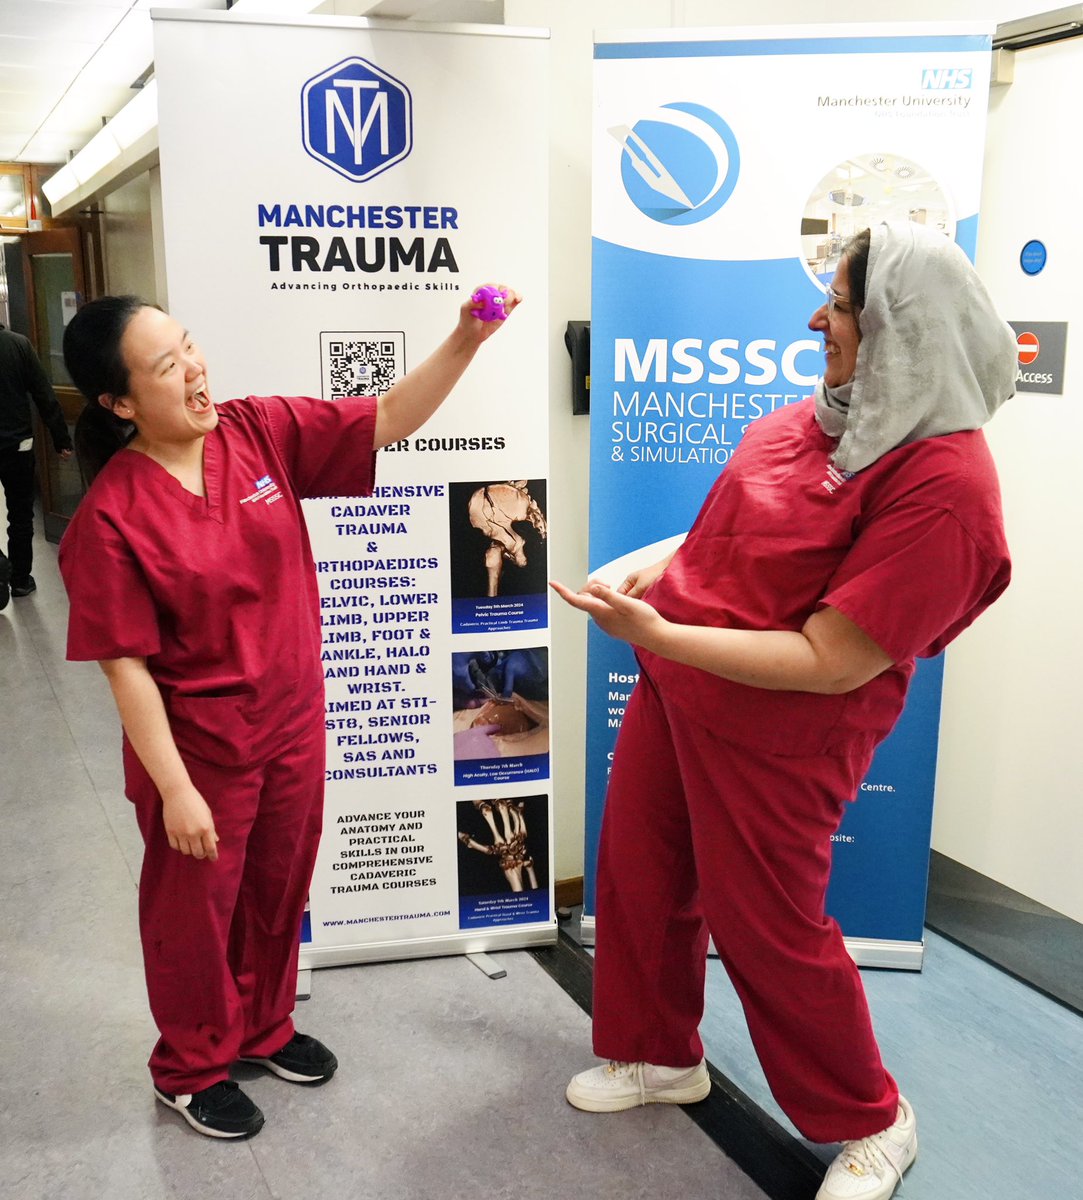 @JunWLim and Mariam are the winners of our best ankle fracture fixation @ManchesterTraum cadaver foot &ankle course today. This was a great learning day @OrthoWomen @bota_uk @BritOrthopaedic @OTrauma #injury #fracture well done Jun and Mariam